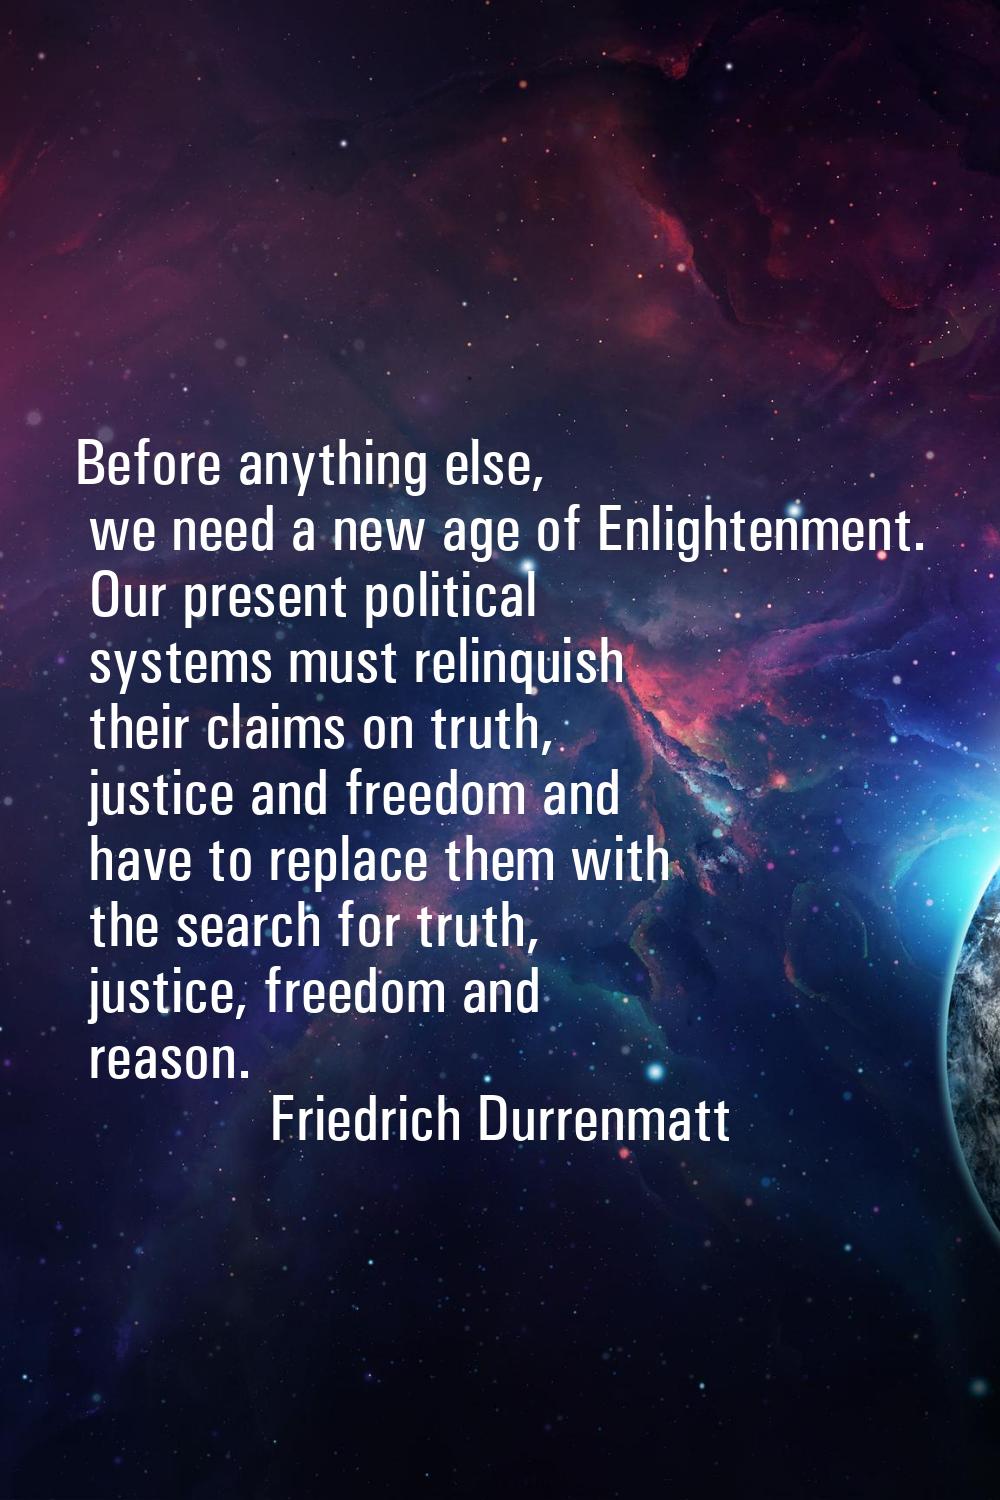 Before anything else, we need a new age of Enlightenment. Our present political systems must relinq